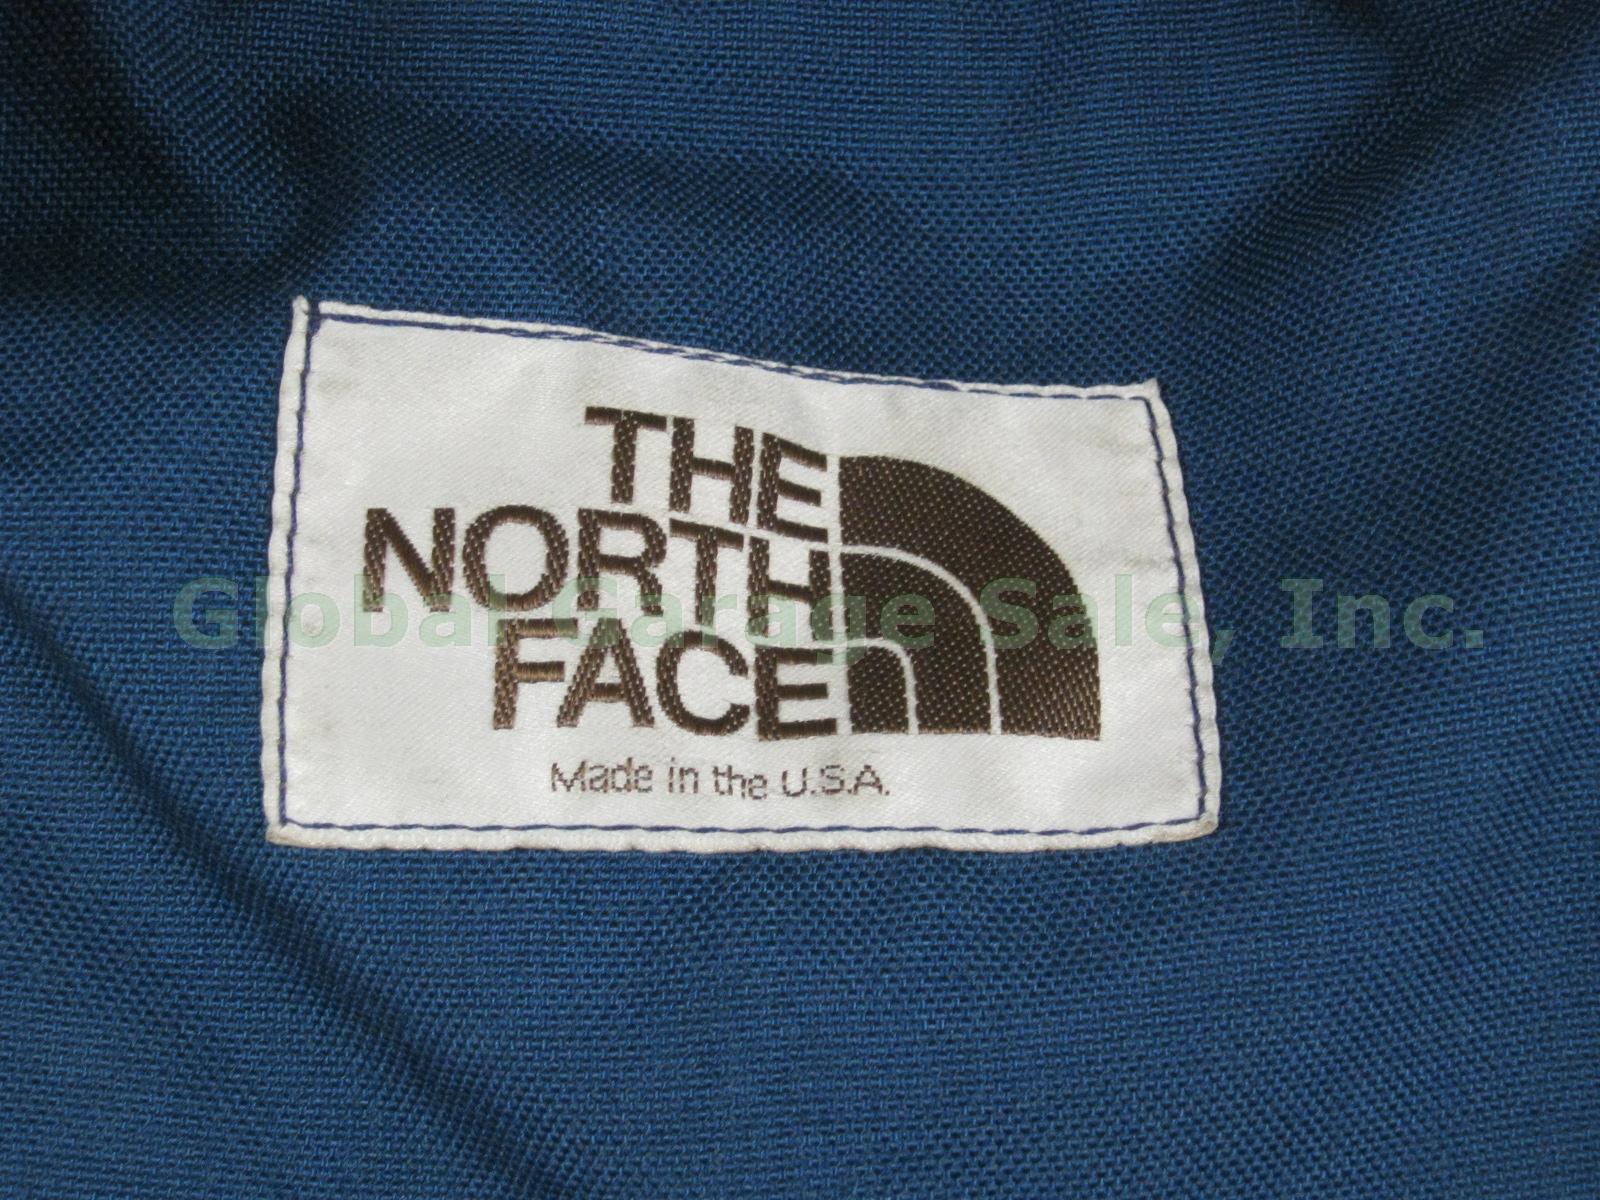 Vintage The North Face Duffel Bag Nylon Leather Excellent Condition! 32"x15" NR! 1